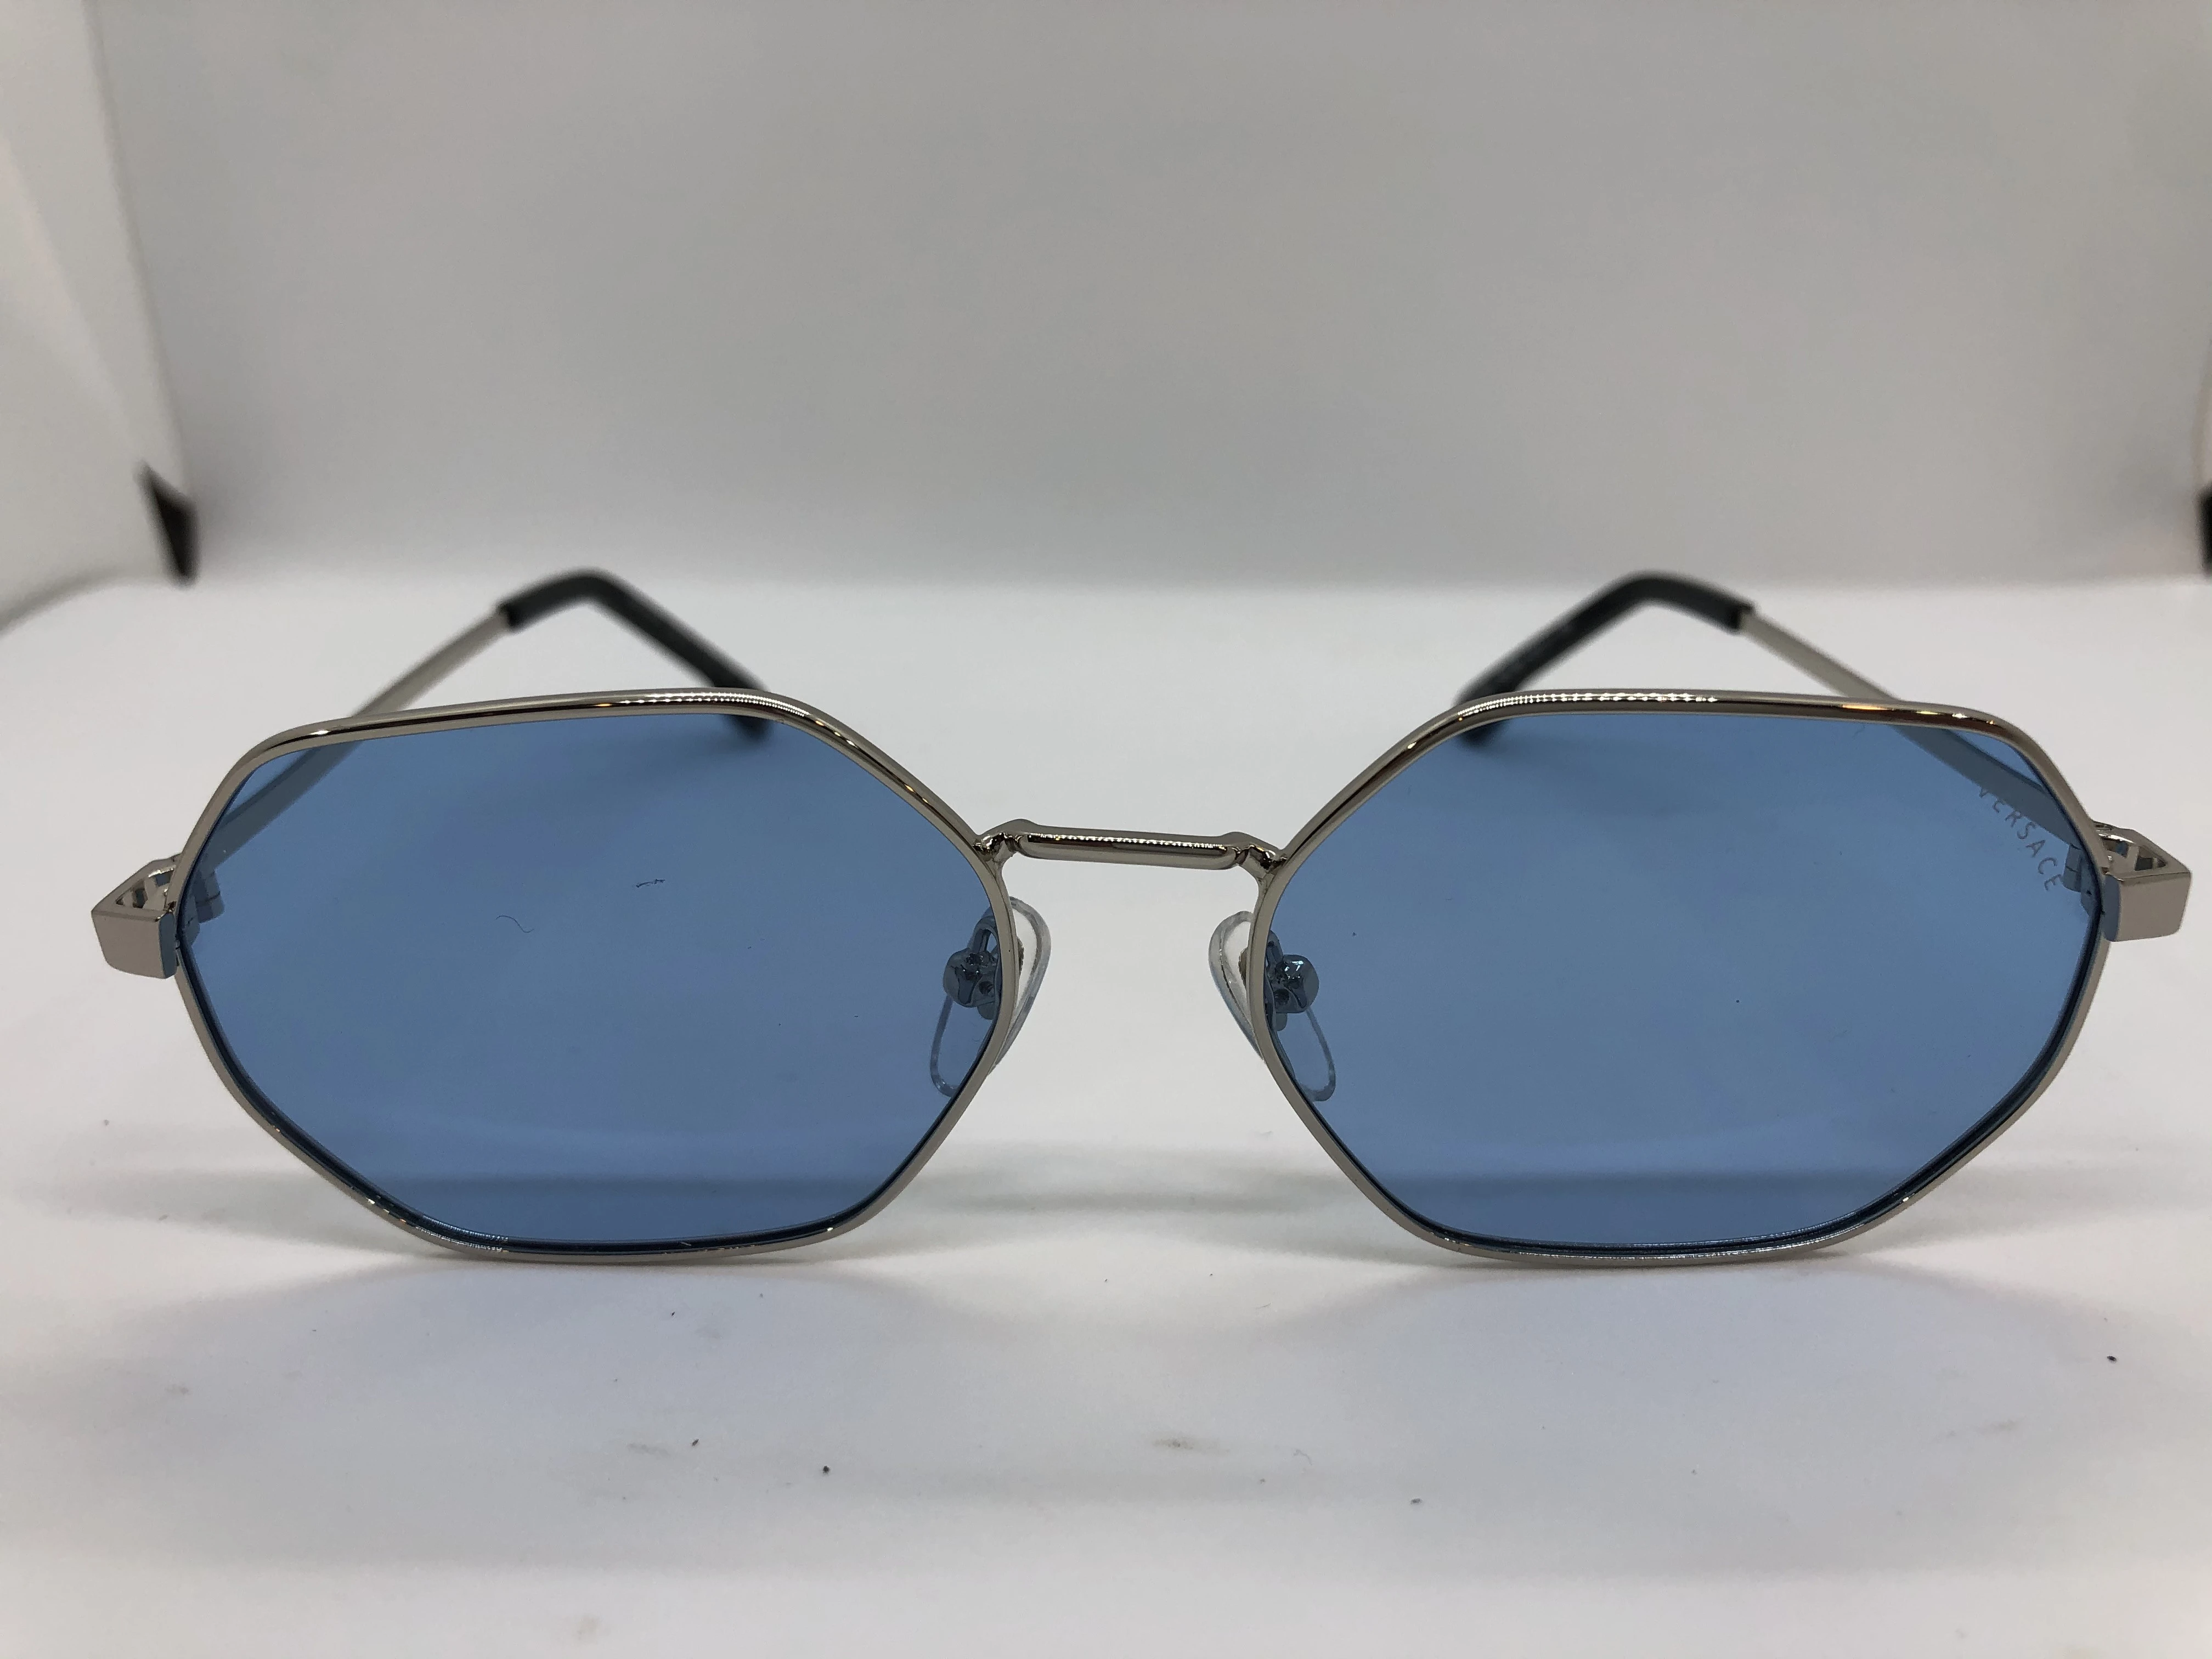 Sunglasses - from Versace - silver metal frame - blue lenses - and silver metal arm - for men